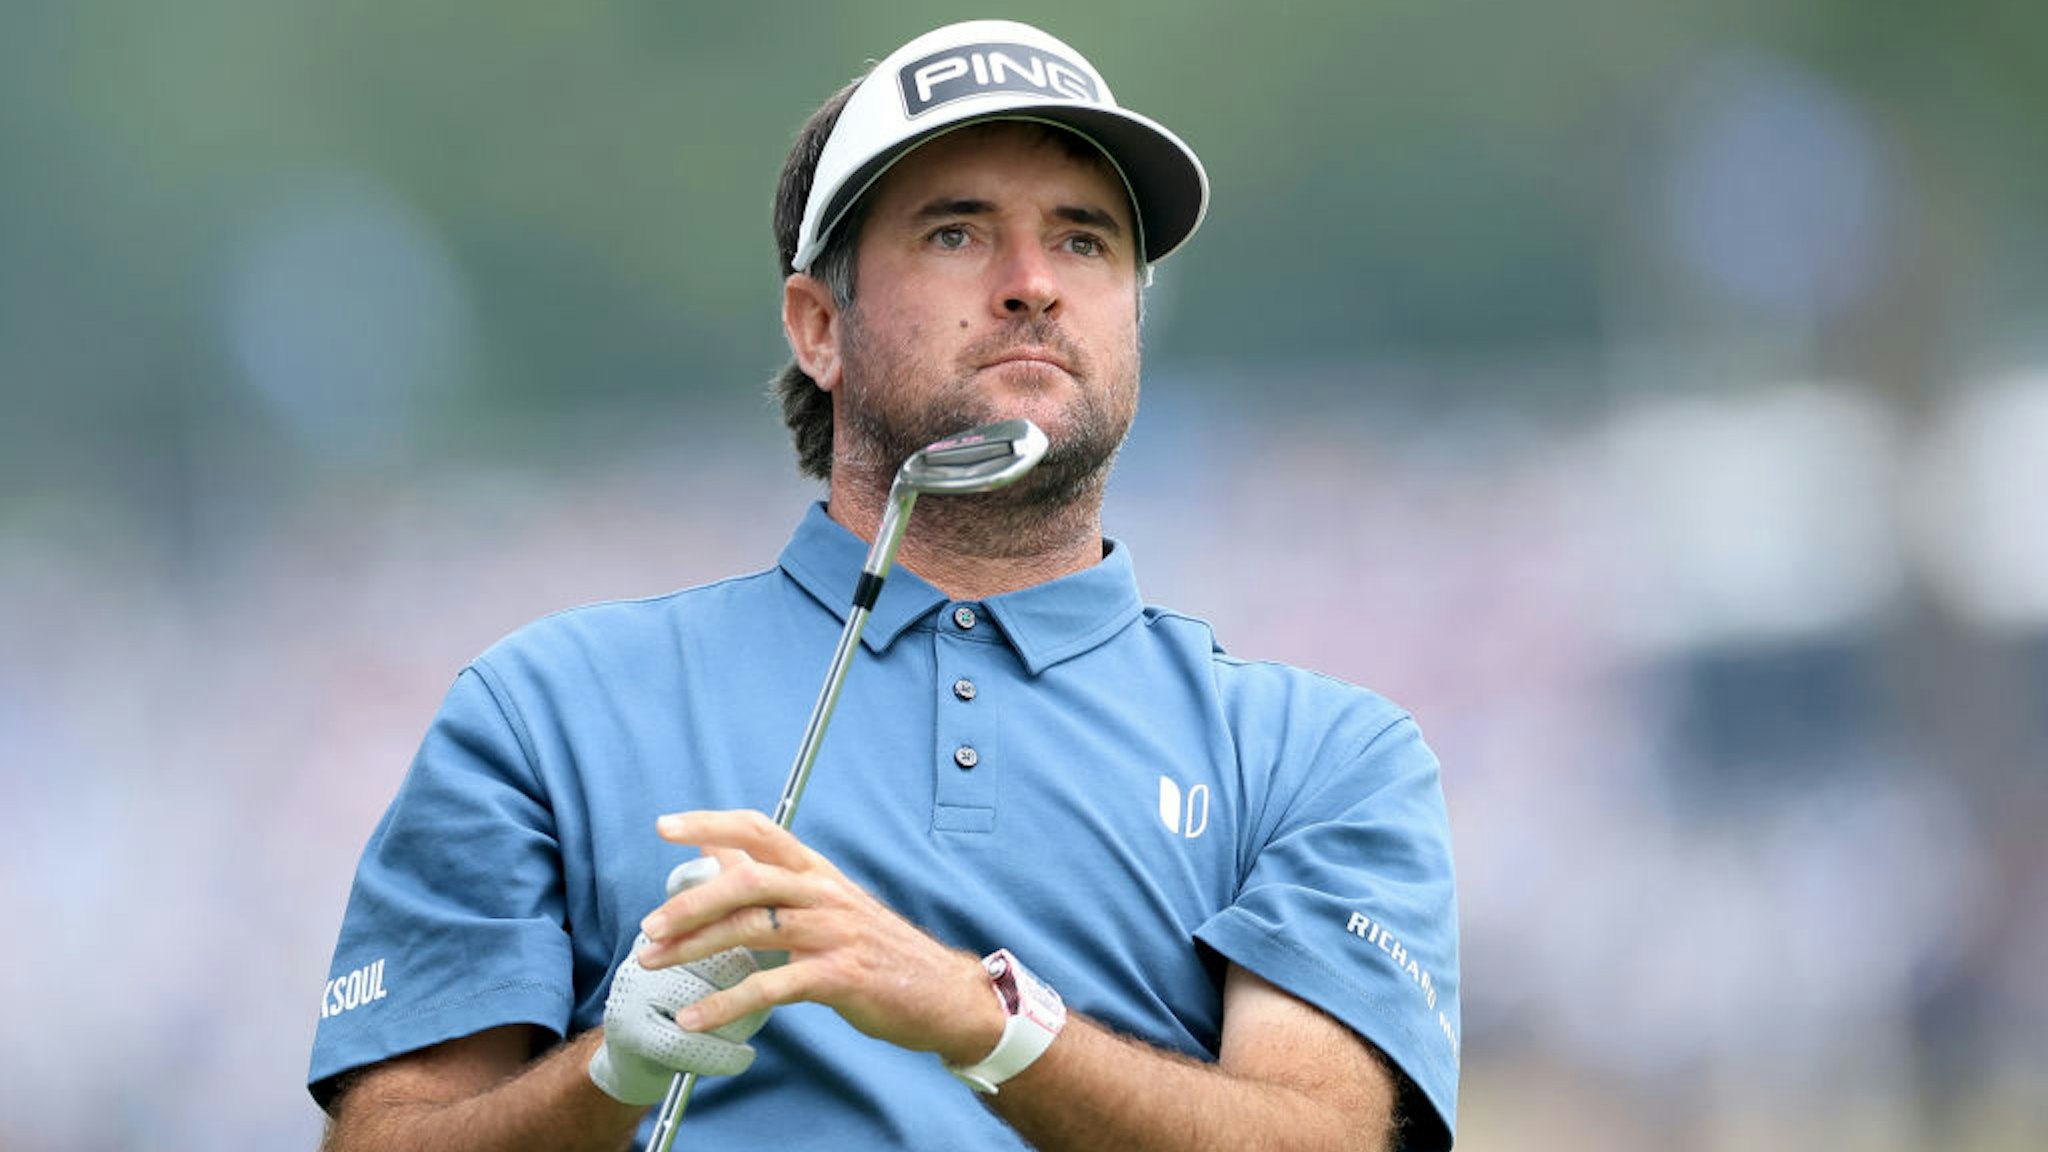 TULSA, OKLAHOMA - MAY 22: Bubba Watson of The United States plays his second shot on the second hole during the final round of the 2022 PGA Championship at Southern Hills Country Club on May 22, 2022 in Tulsa, Oklahoma. (Photo by David Cannon/Getty Images)